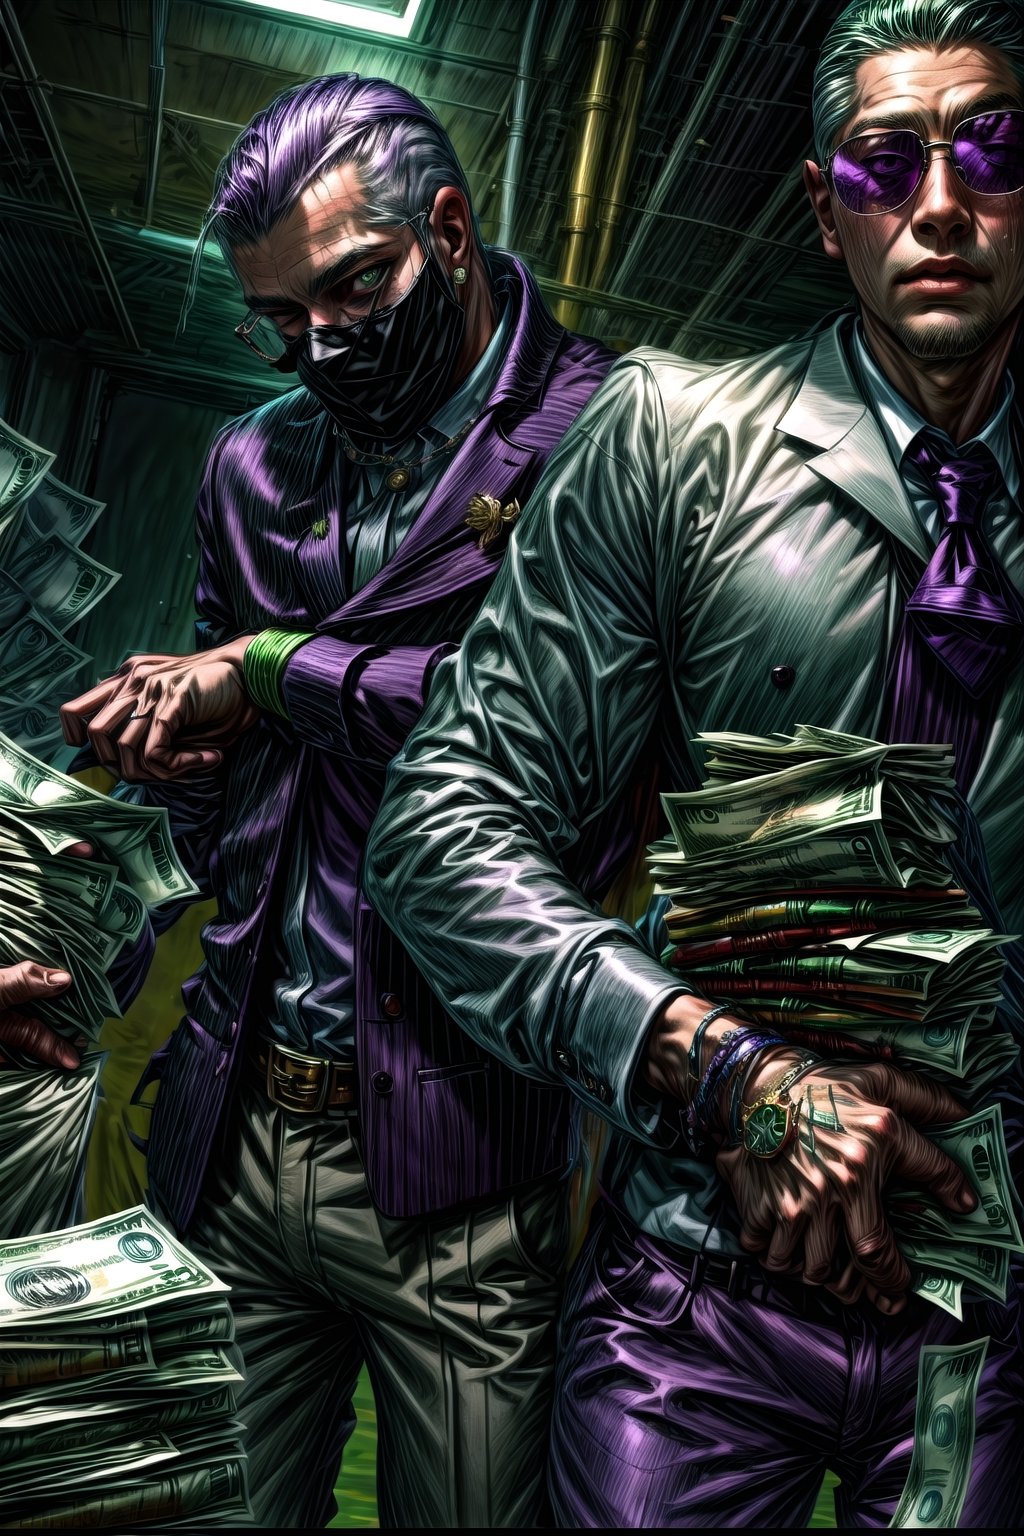 Masterpiece,Clean face,perfecteyes,No face, White and purple Outfit,Mafia, Gangster,Dollars,Green money,High detailed 